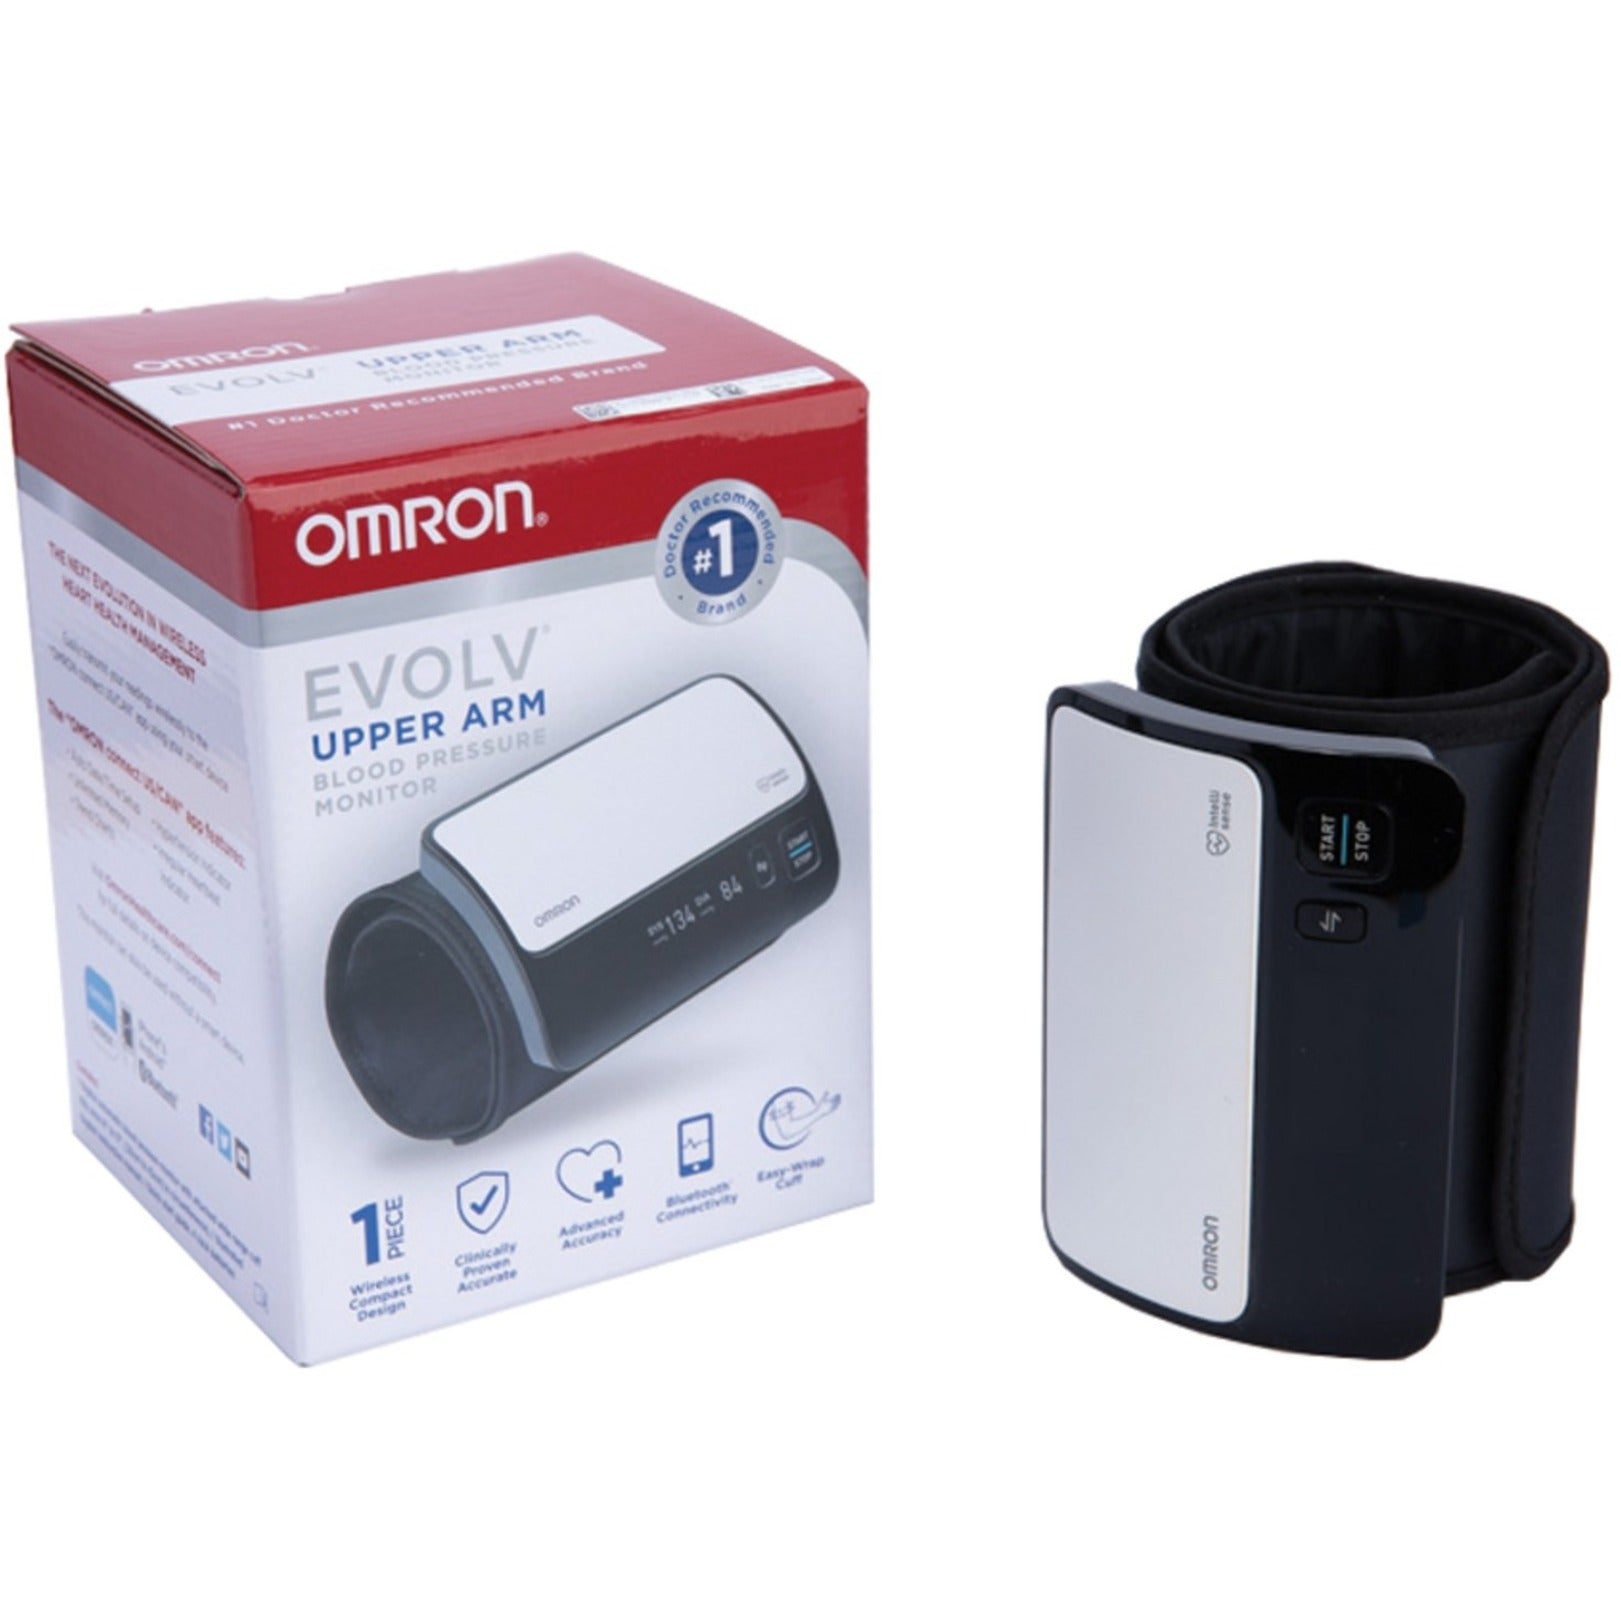 Omron BP7000 Evolv Wireless Upper Arm Blood Pressure Monitor, Clinically Validated, Bluetooth Connectivity